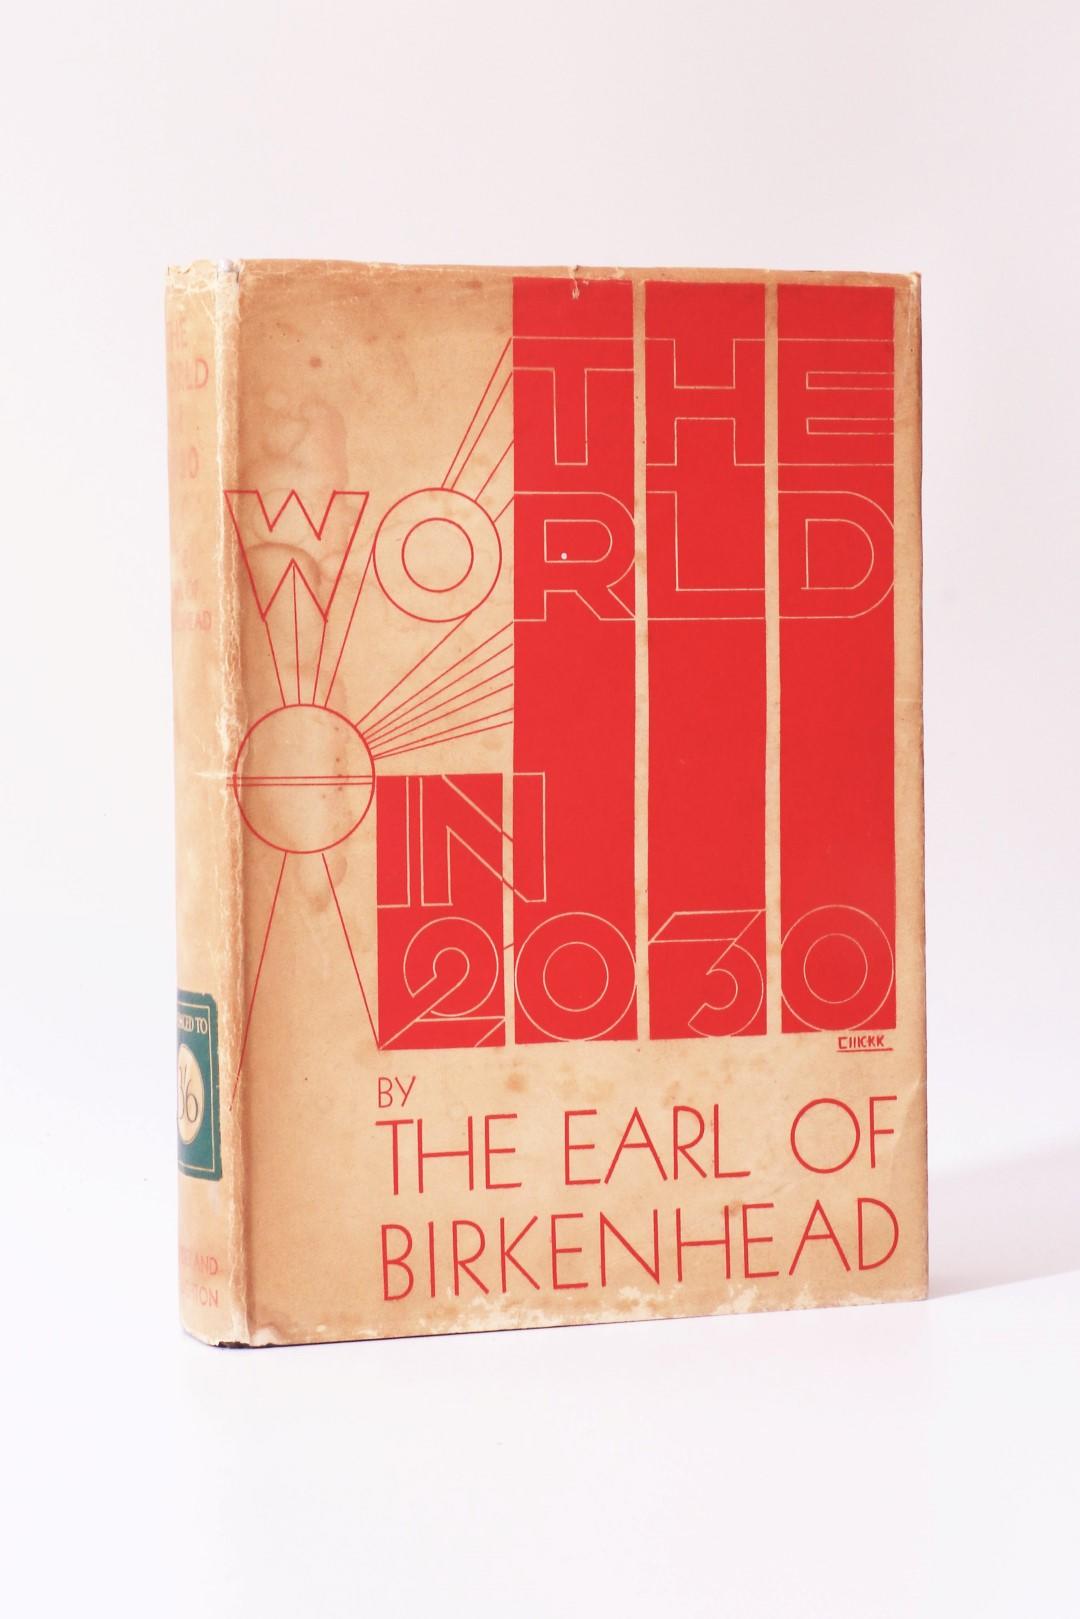 The Earl of Bickenhead [Frederick Smith] - The World in 2030 - Hodder & Stoughton, 1930, First Edition.